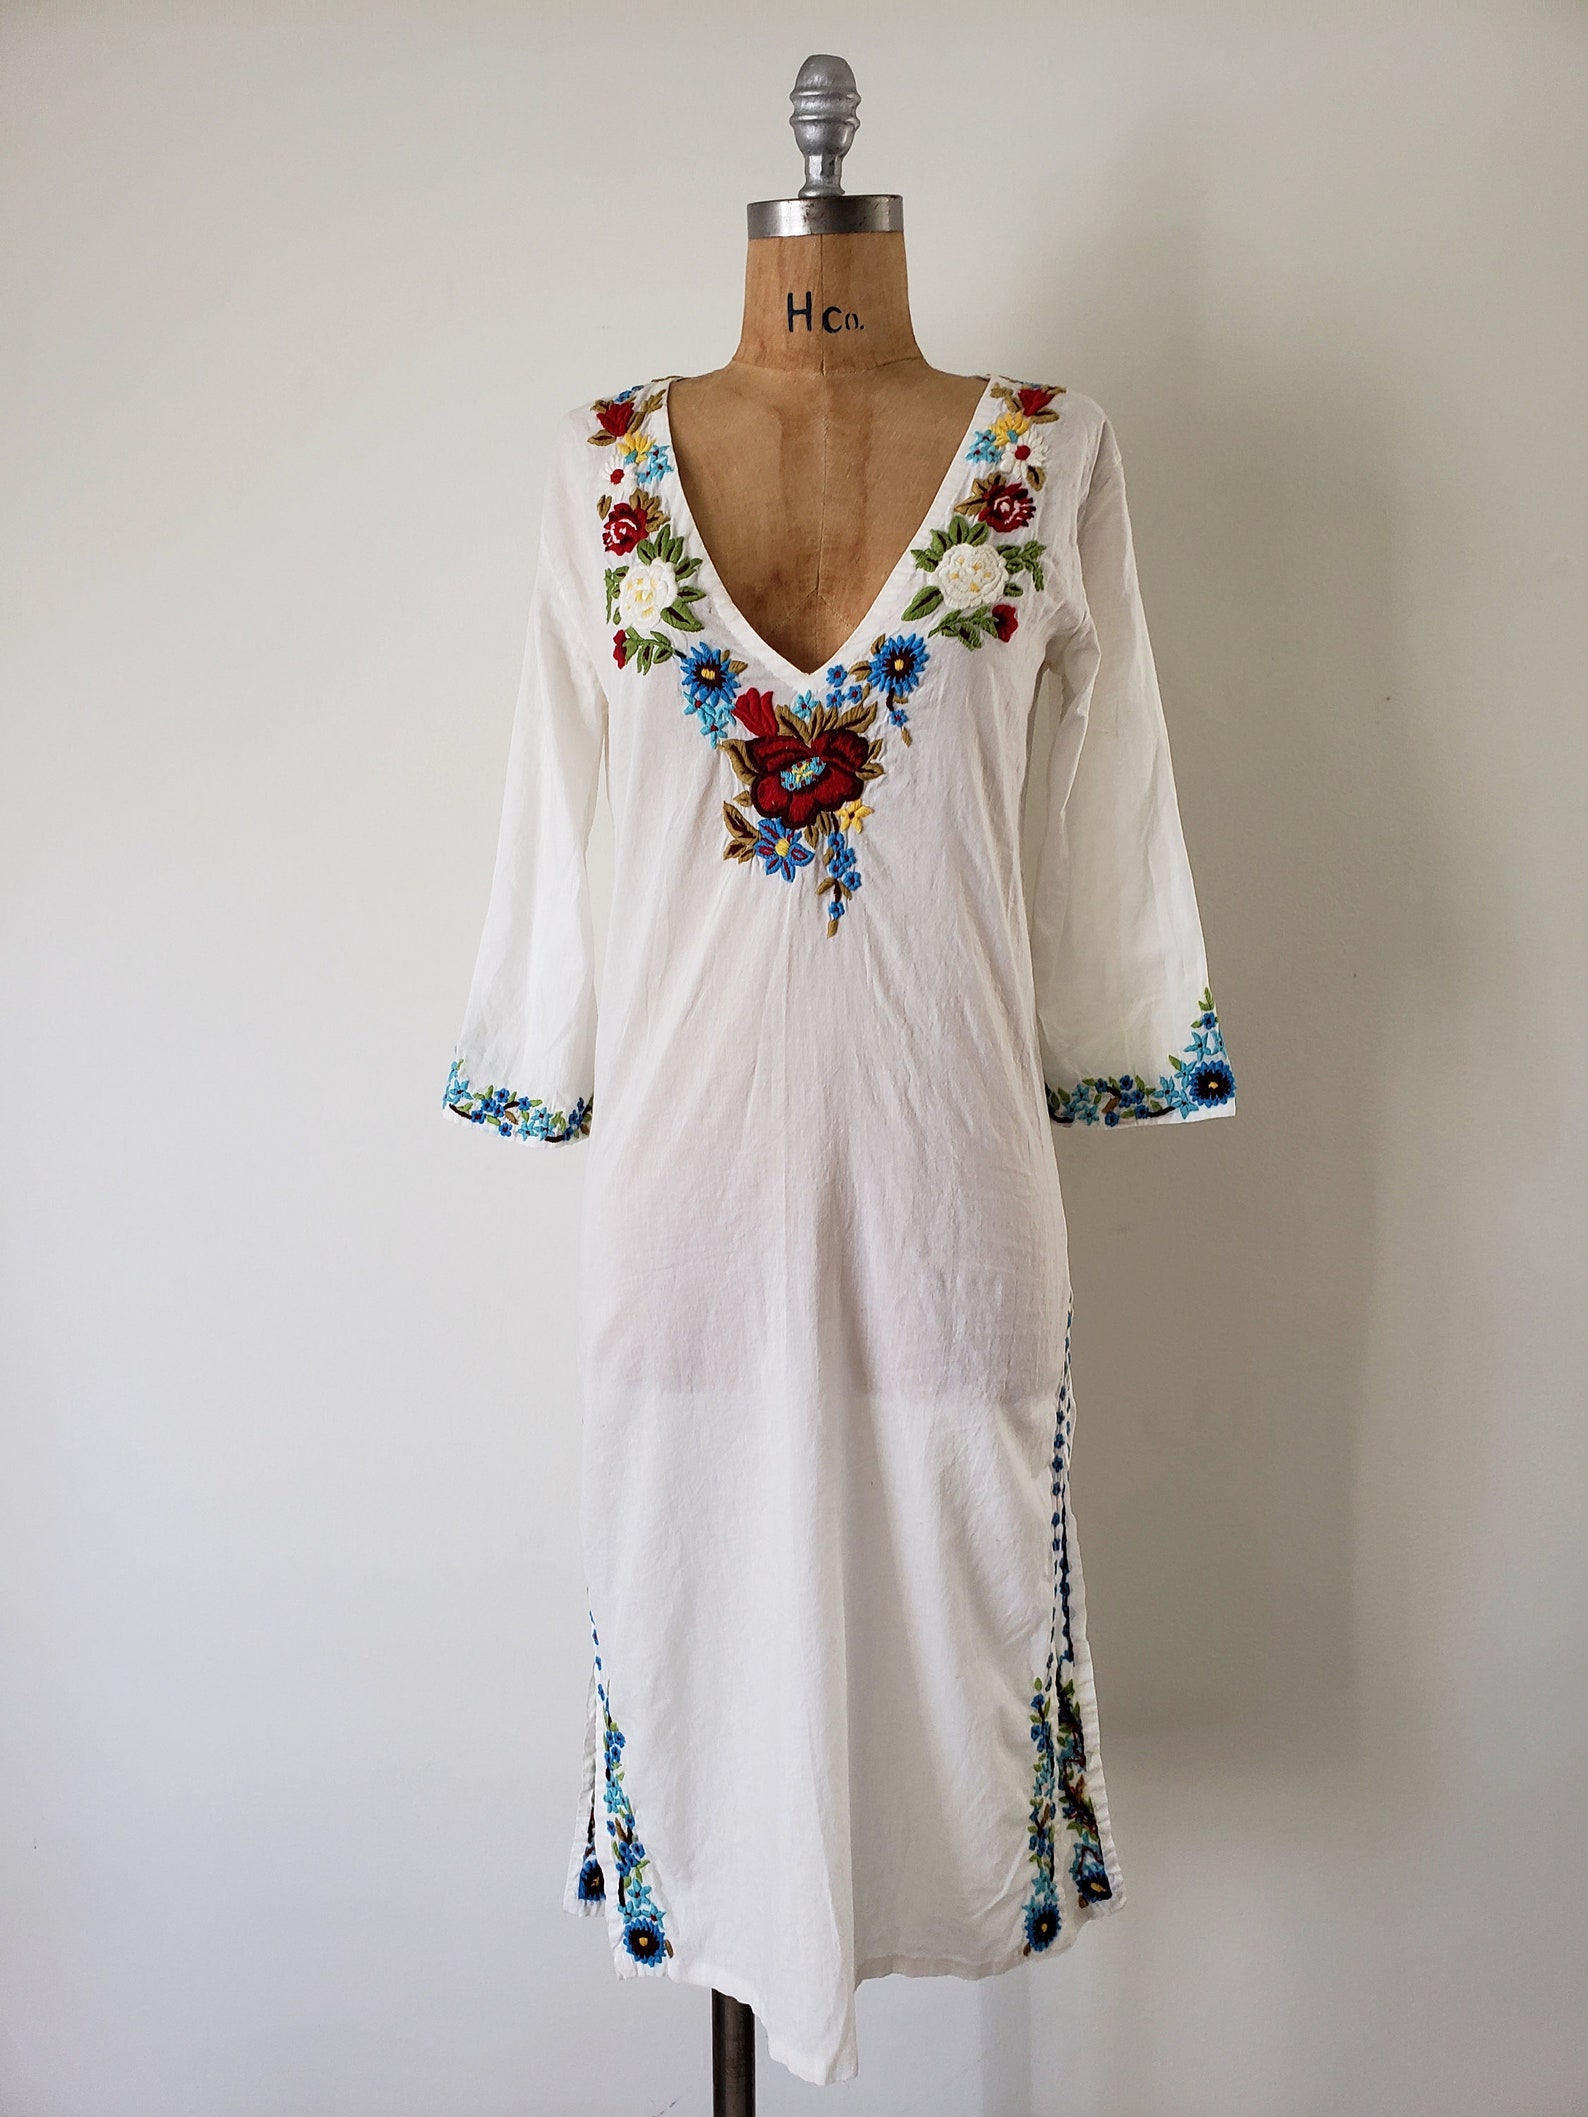 Señorita Tunic Dress 1970s Vintage Mexican Embroidered | Etsy